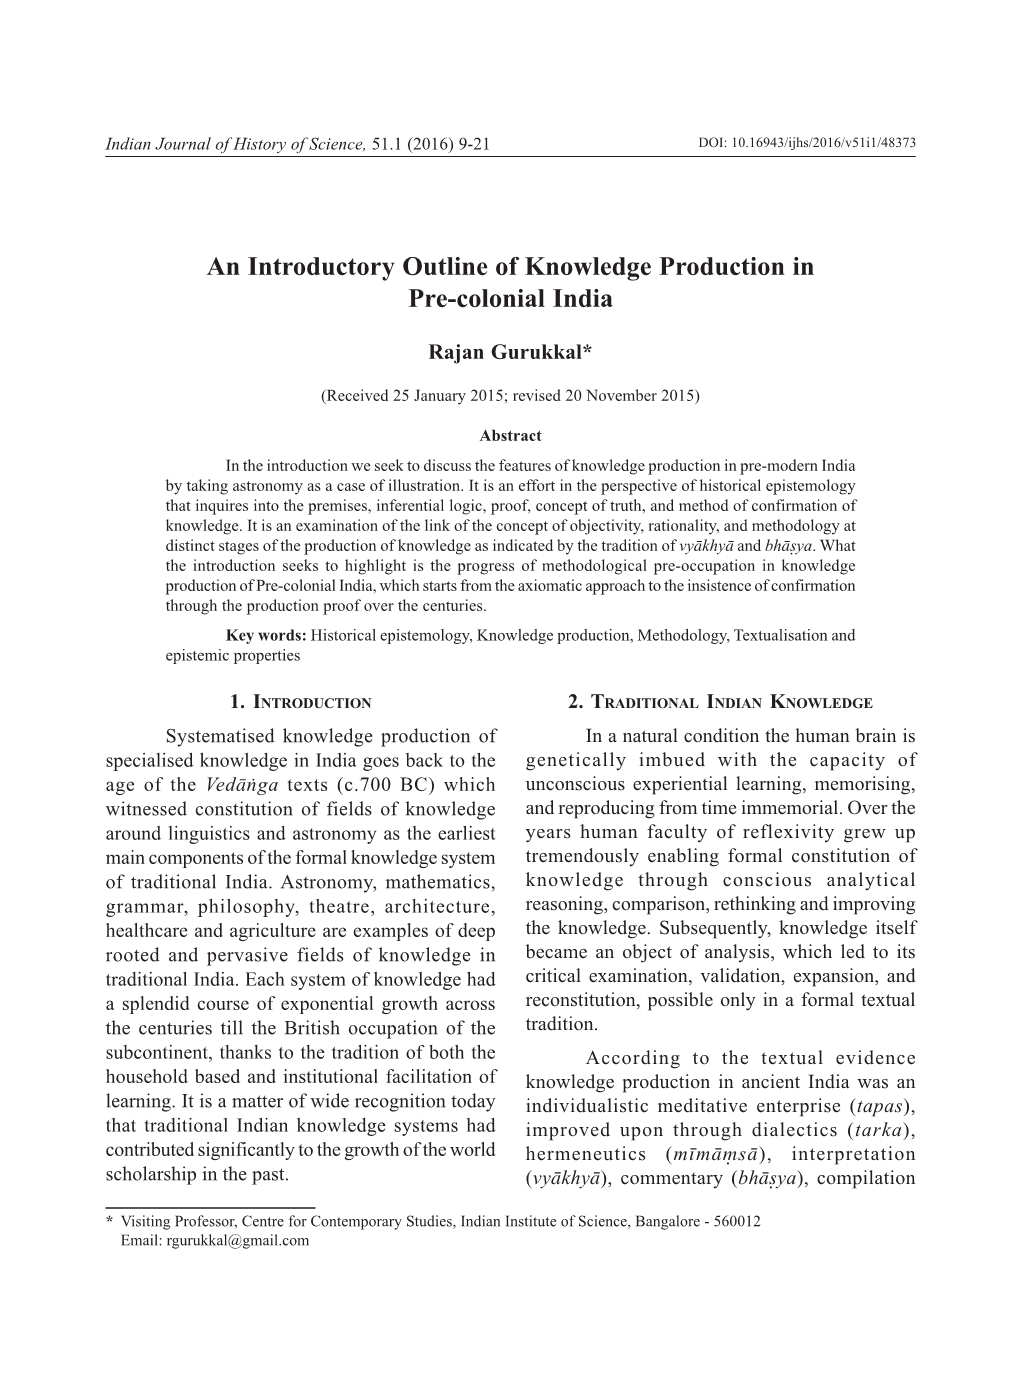 An Introductory Outline of Knowledge Production in Pre-Colonial India